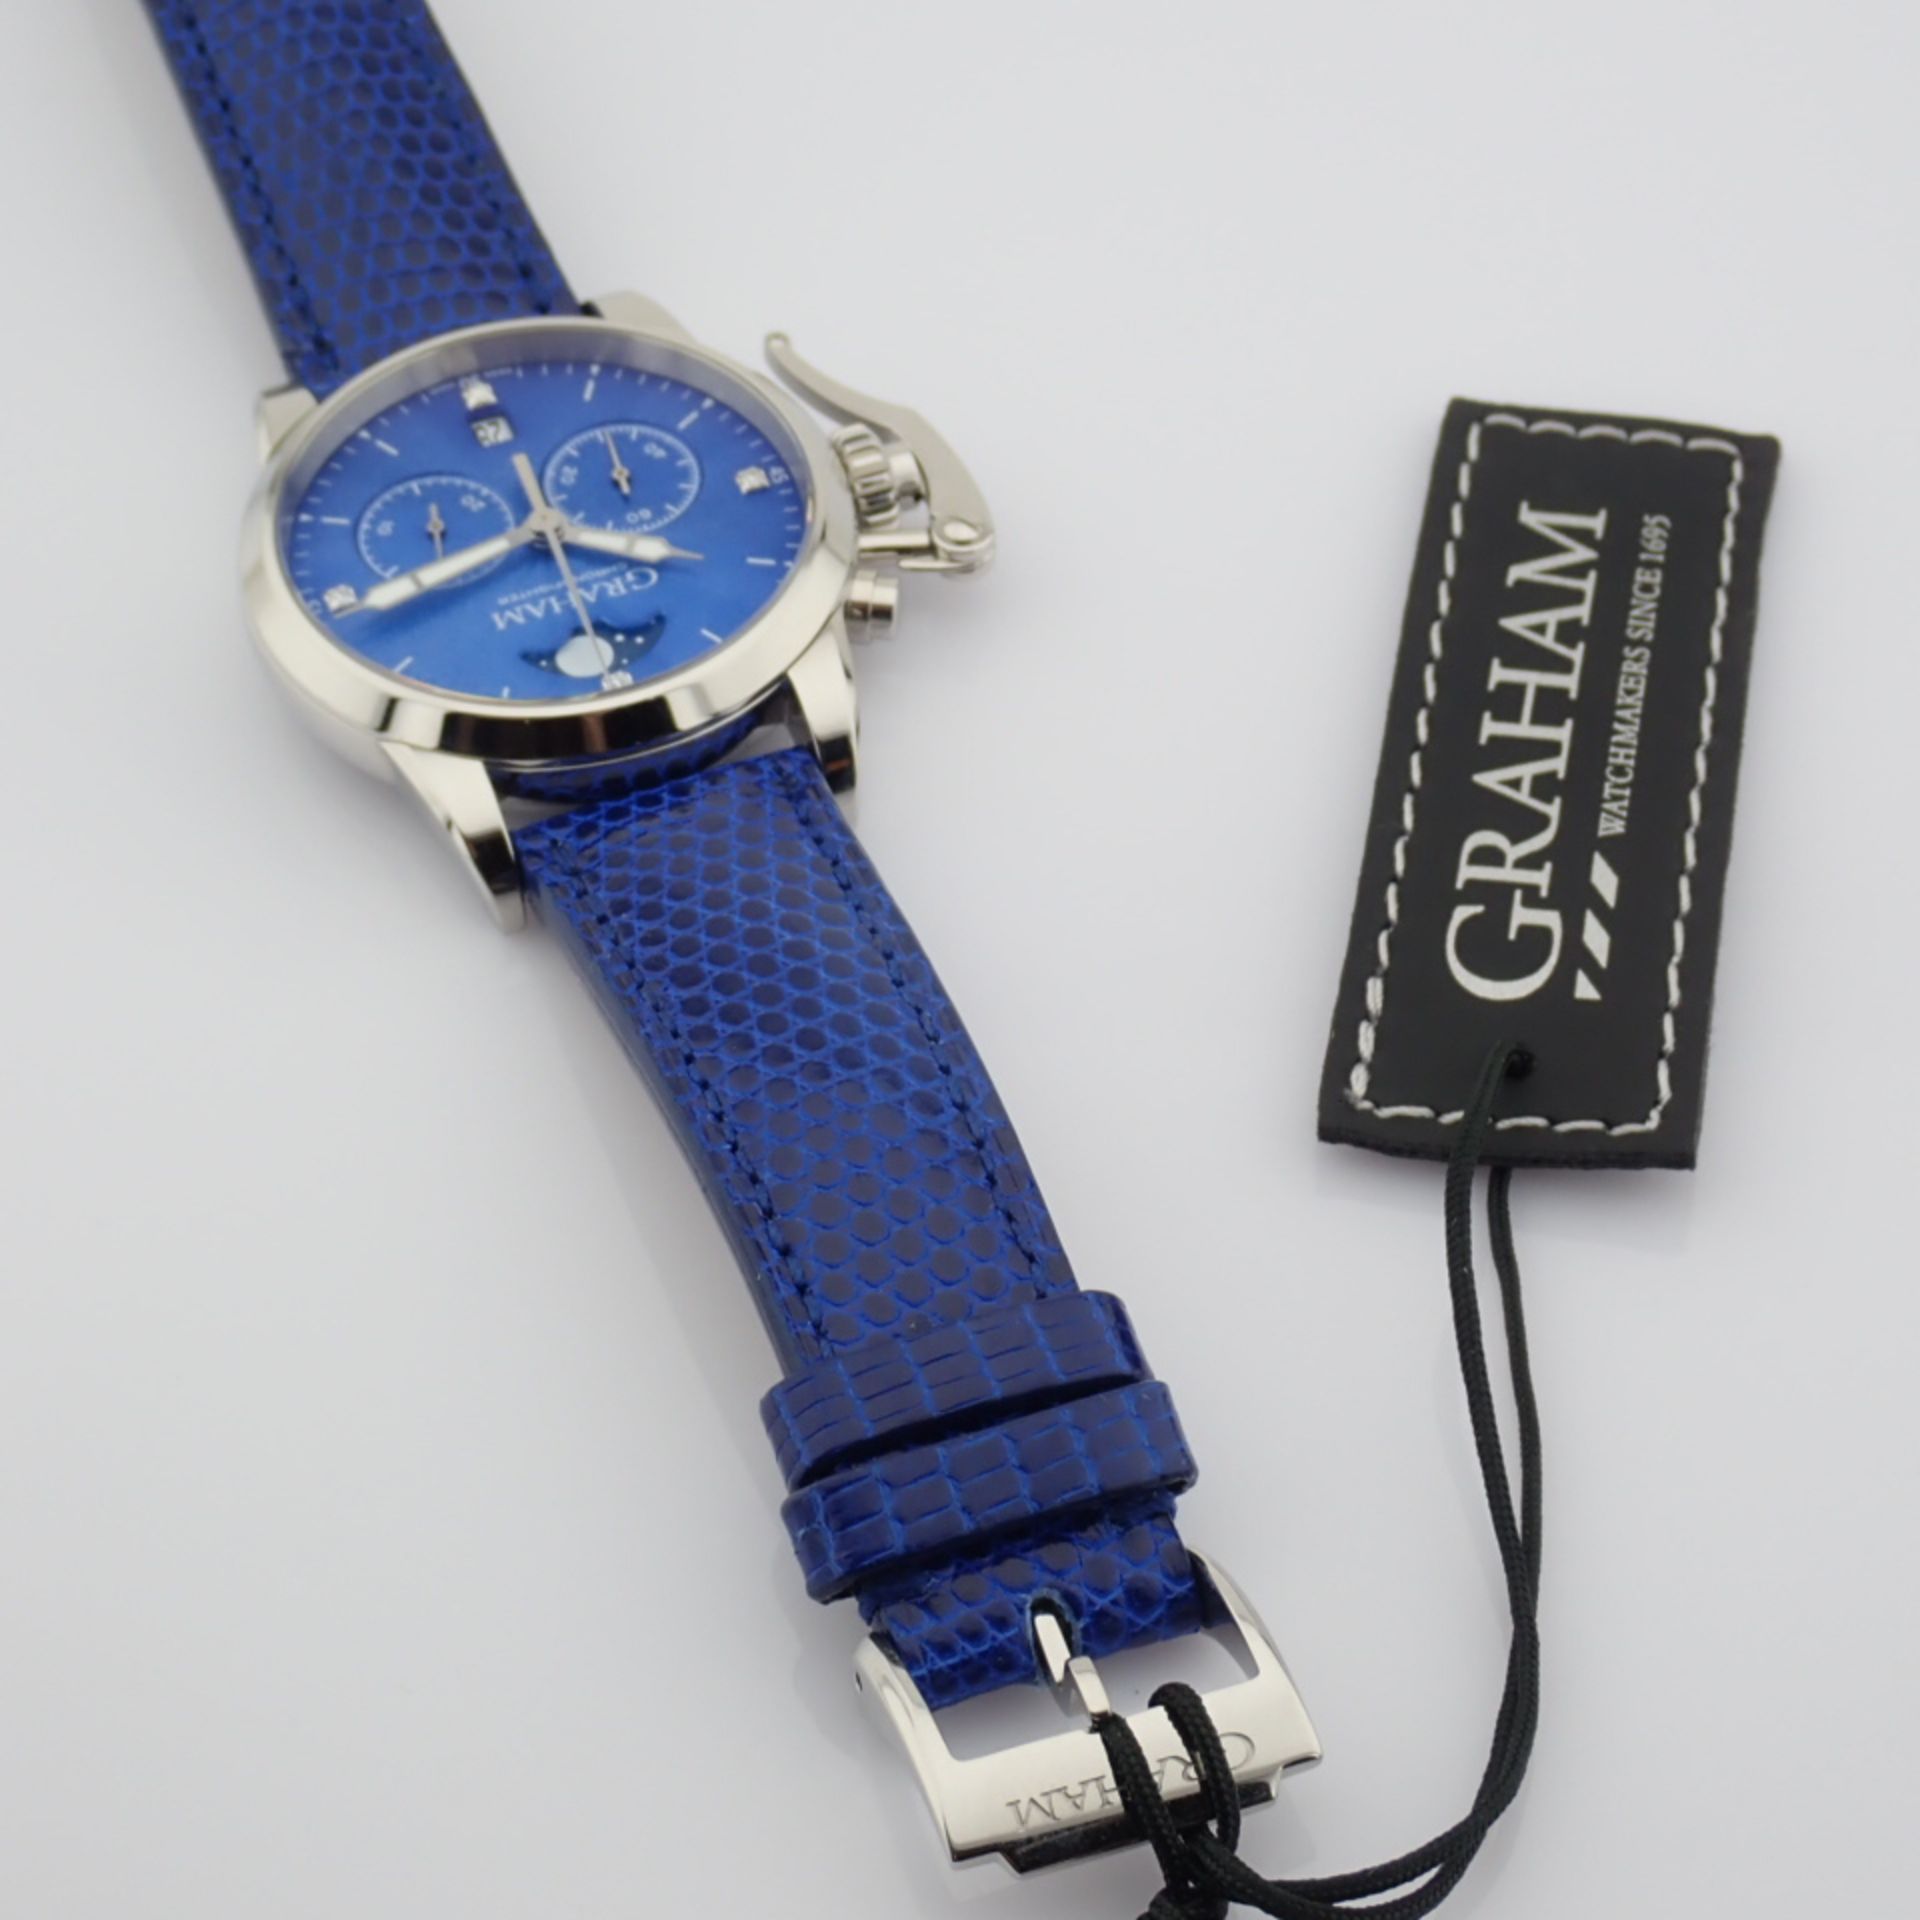 Graham / Chronofighter Lady Moon - Lady's Steel Wrist Watch - Image 9 of 15